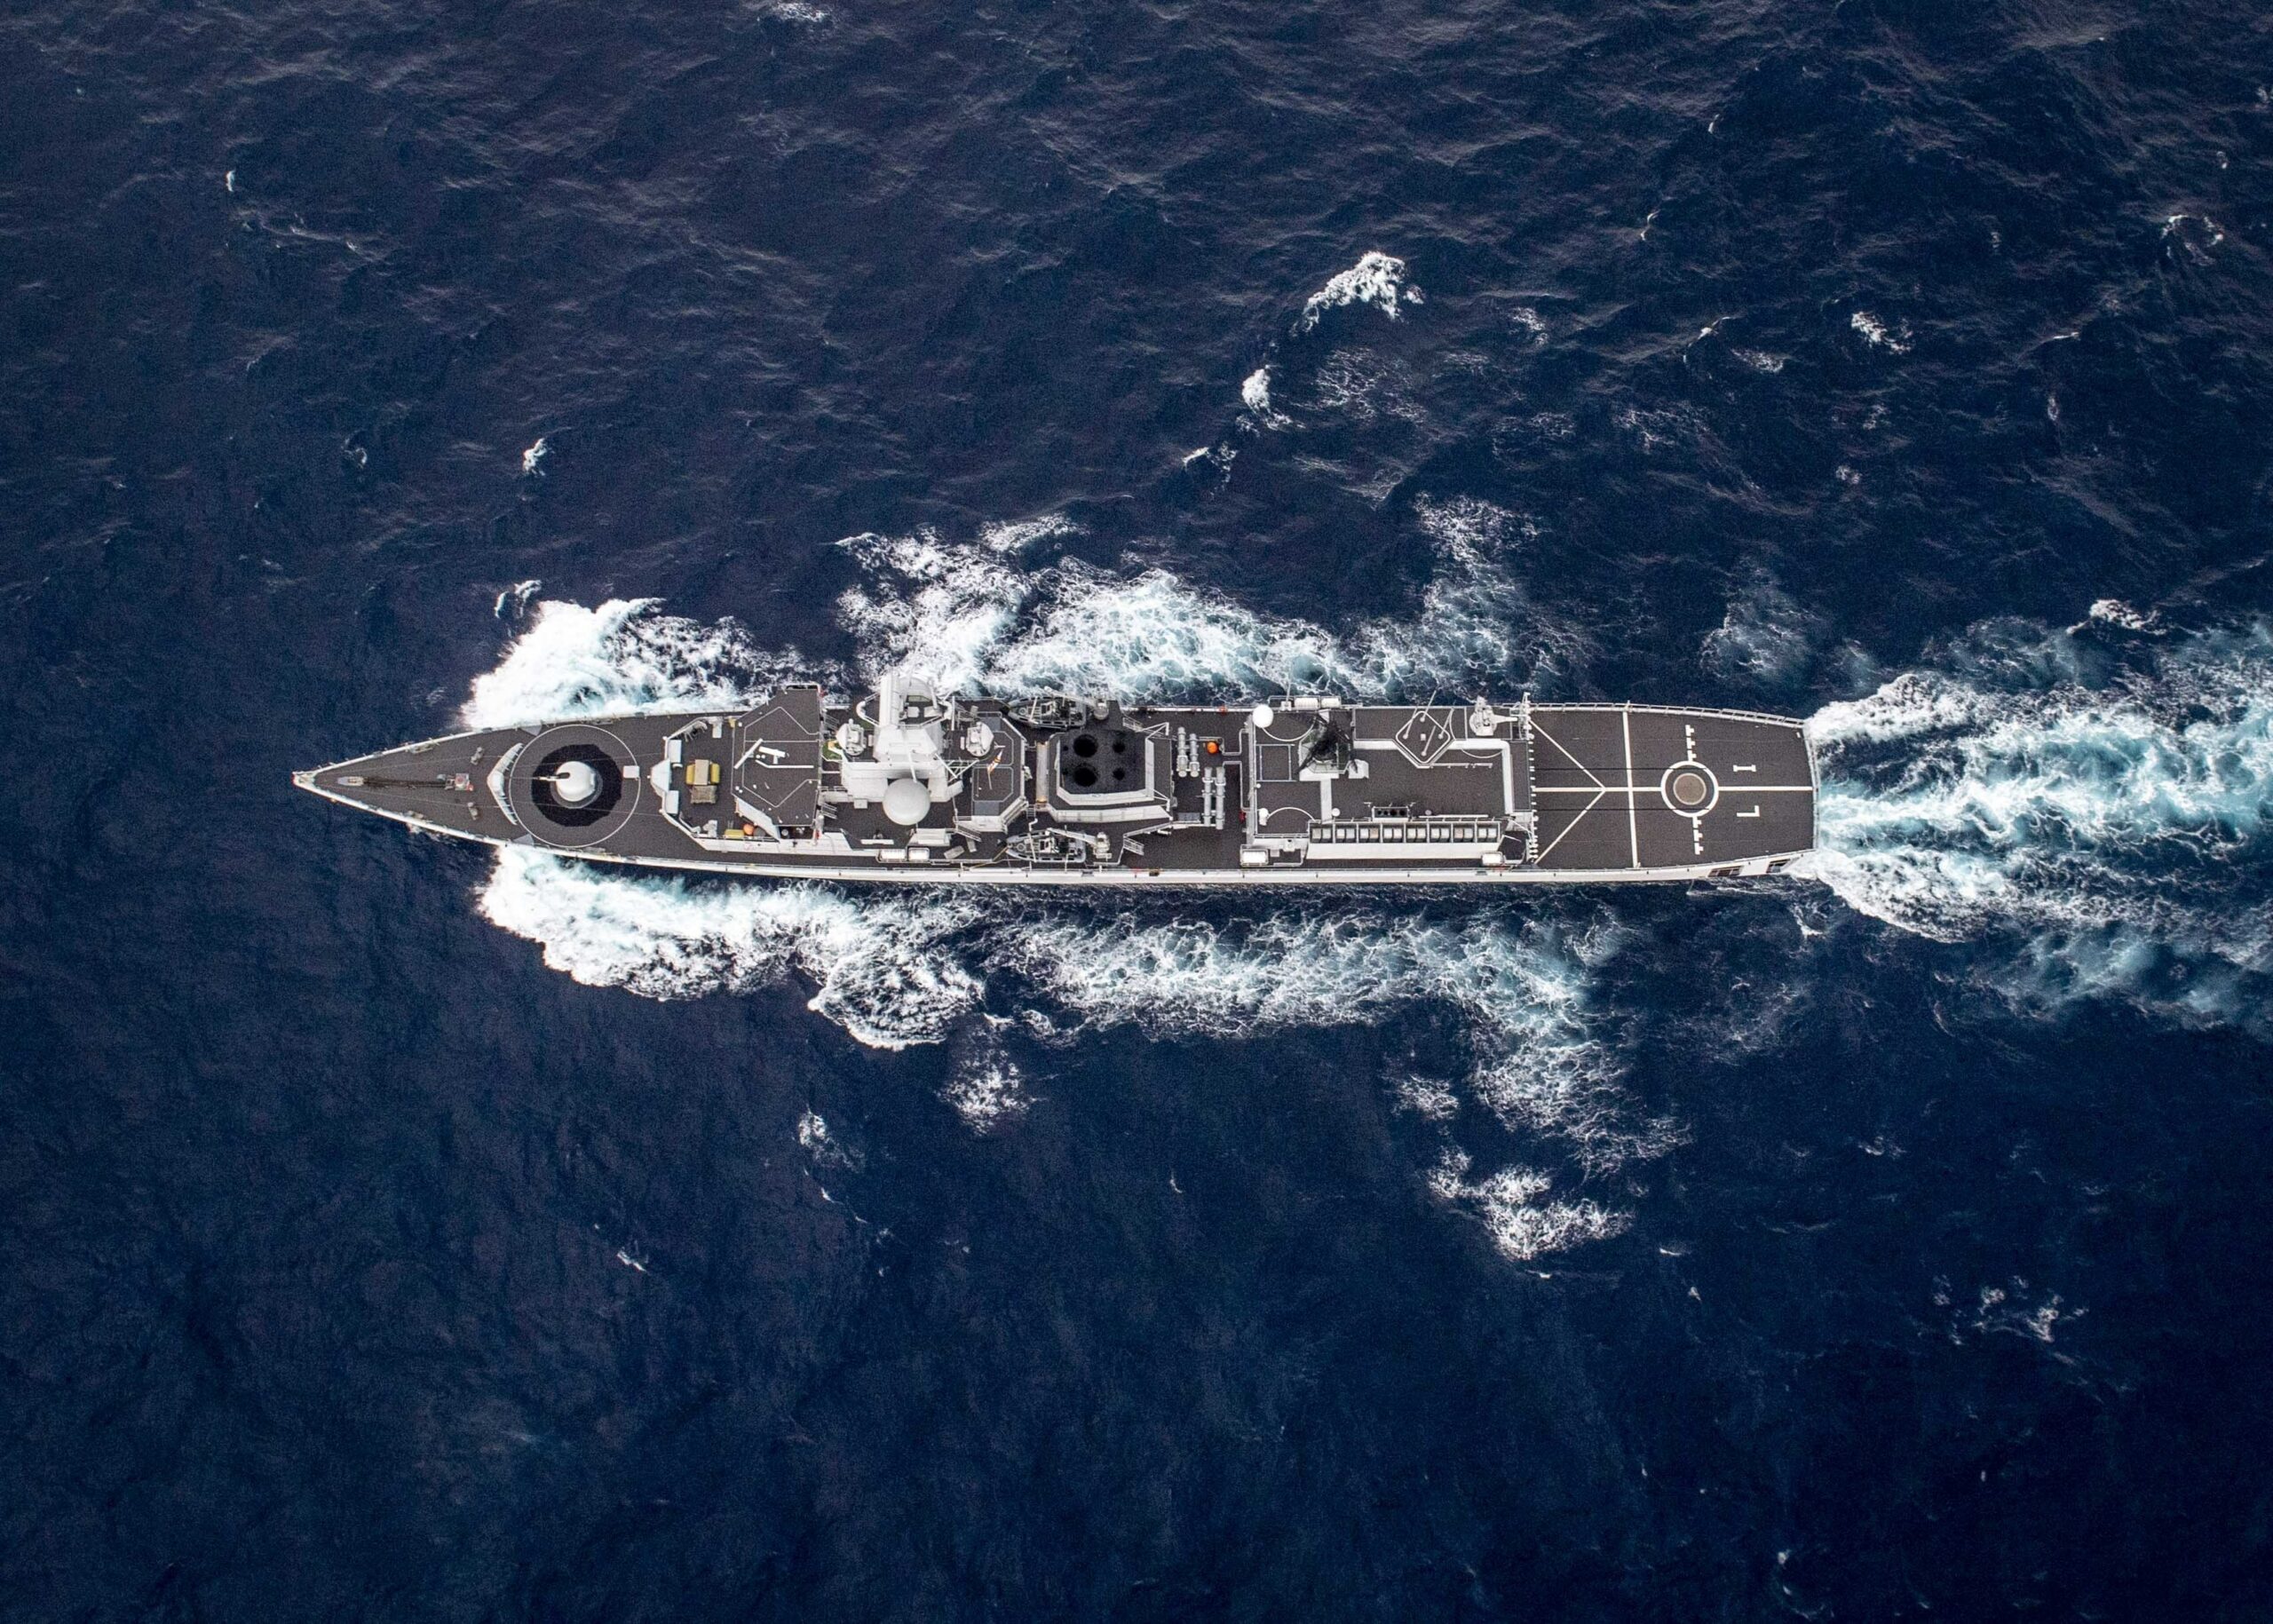 ATLANTIC OCEAN (Aug. 25, 2019) The Belgian navy Karel Doorman-class frigate Leopold I (F930) transits the Atlantic Ocean. Leopold I is underway on a regularly-scheduled deployment as part of Standing NATO Maritime Group 1 to conduct maritime operations and provide a continuous maritime capability for NATO in the northern Atlantic. (U.S. Navy photo by Mass Communication Specialist 2nd Class Cameron Stoner)